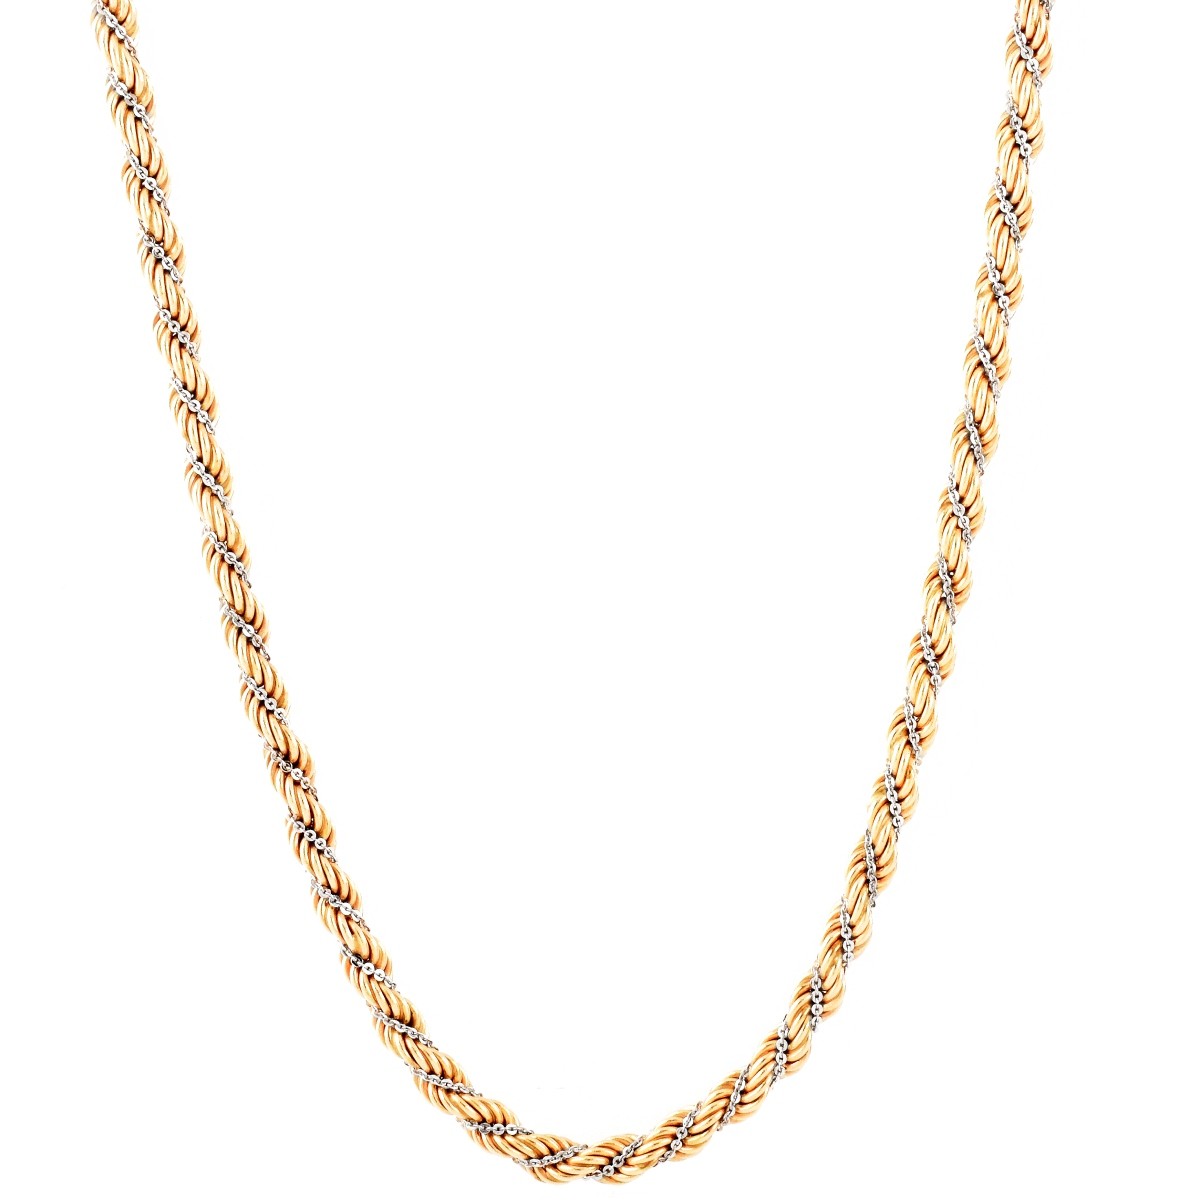 Vintage 14K Gold Rope Chain